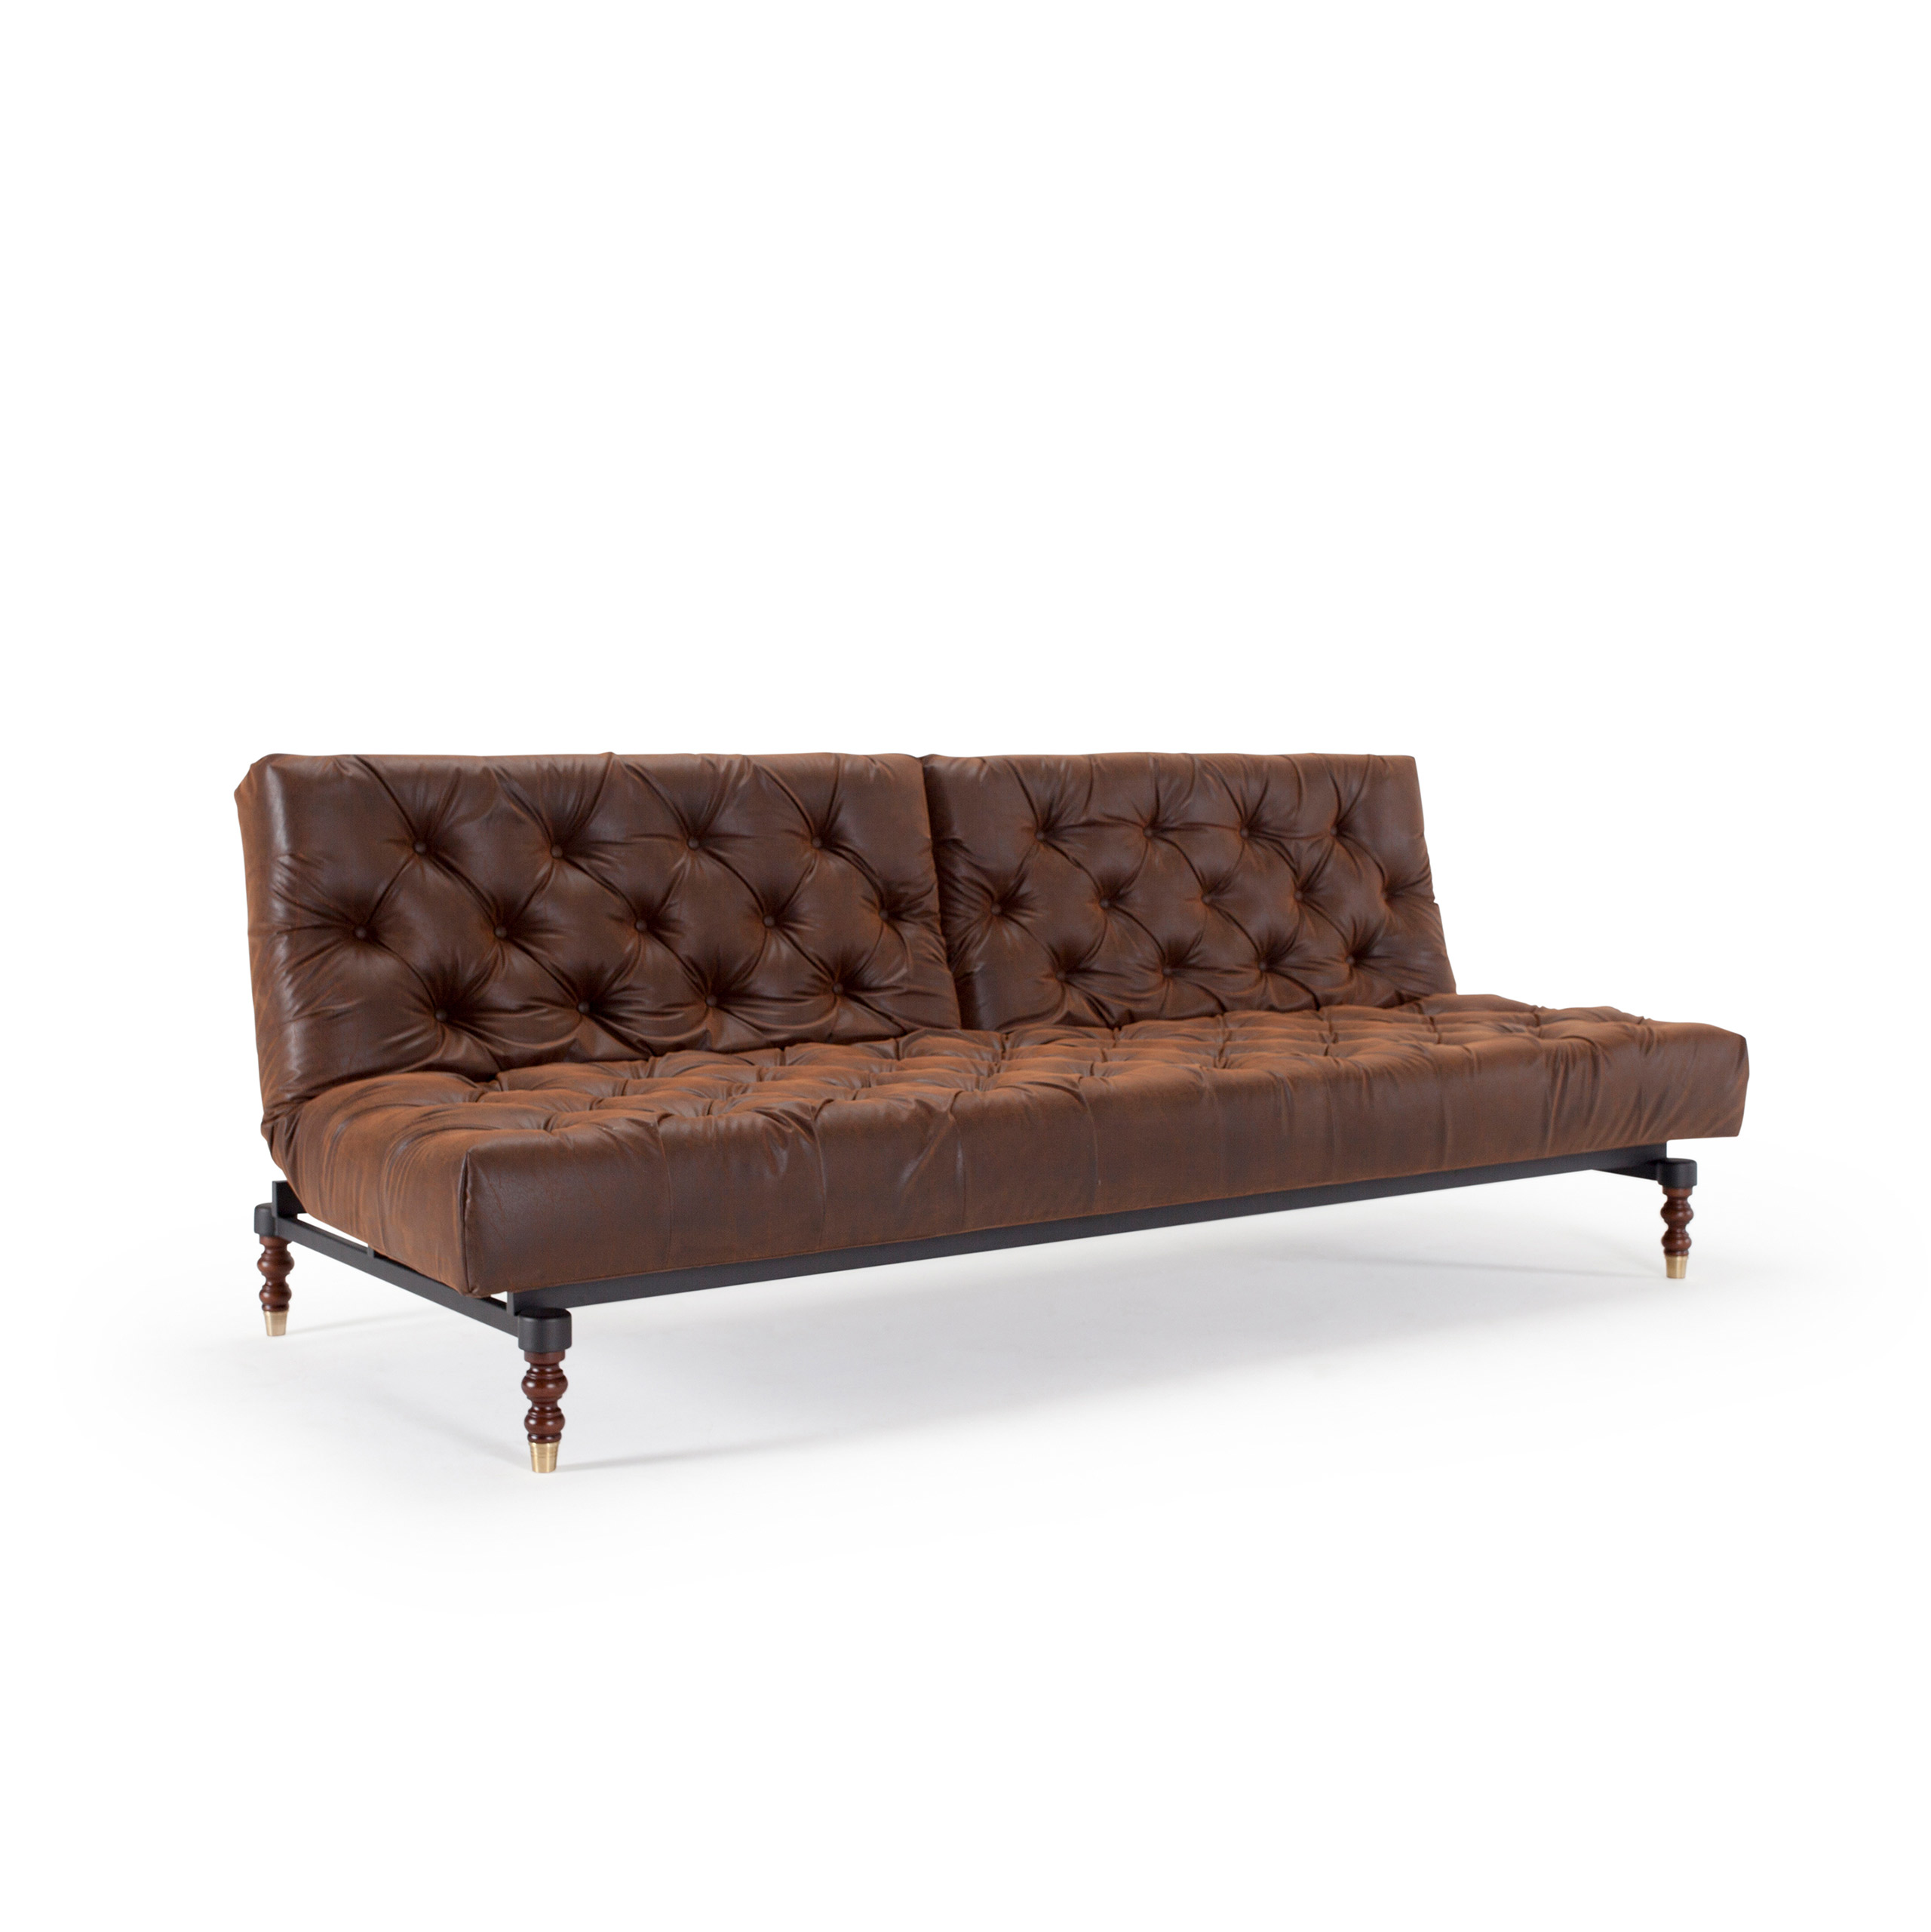 Chesterfield Oldschool Sofa Bed